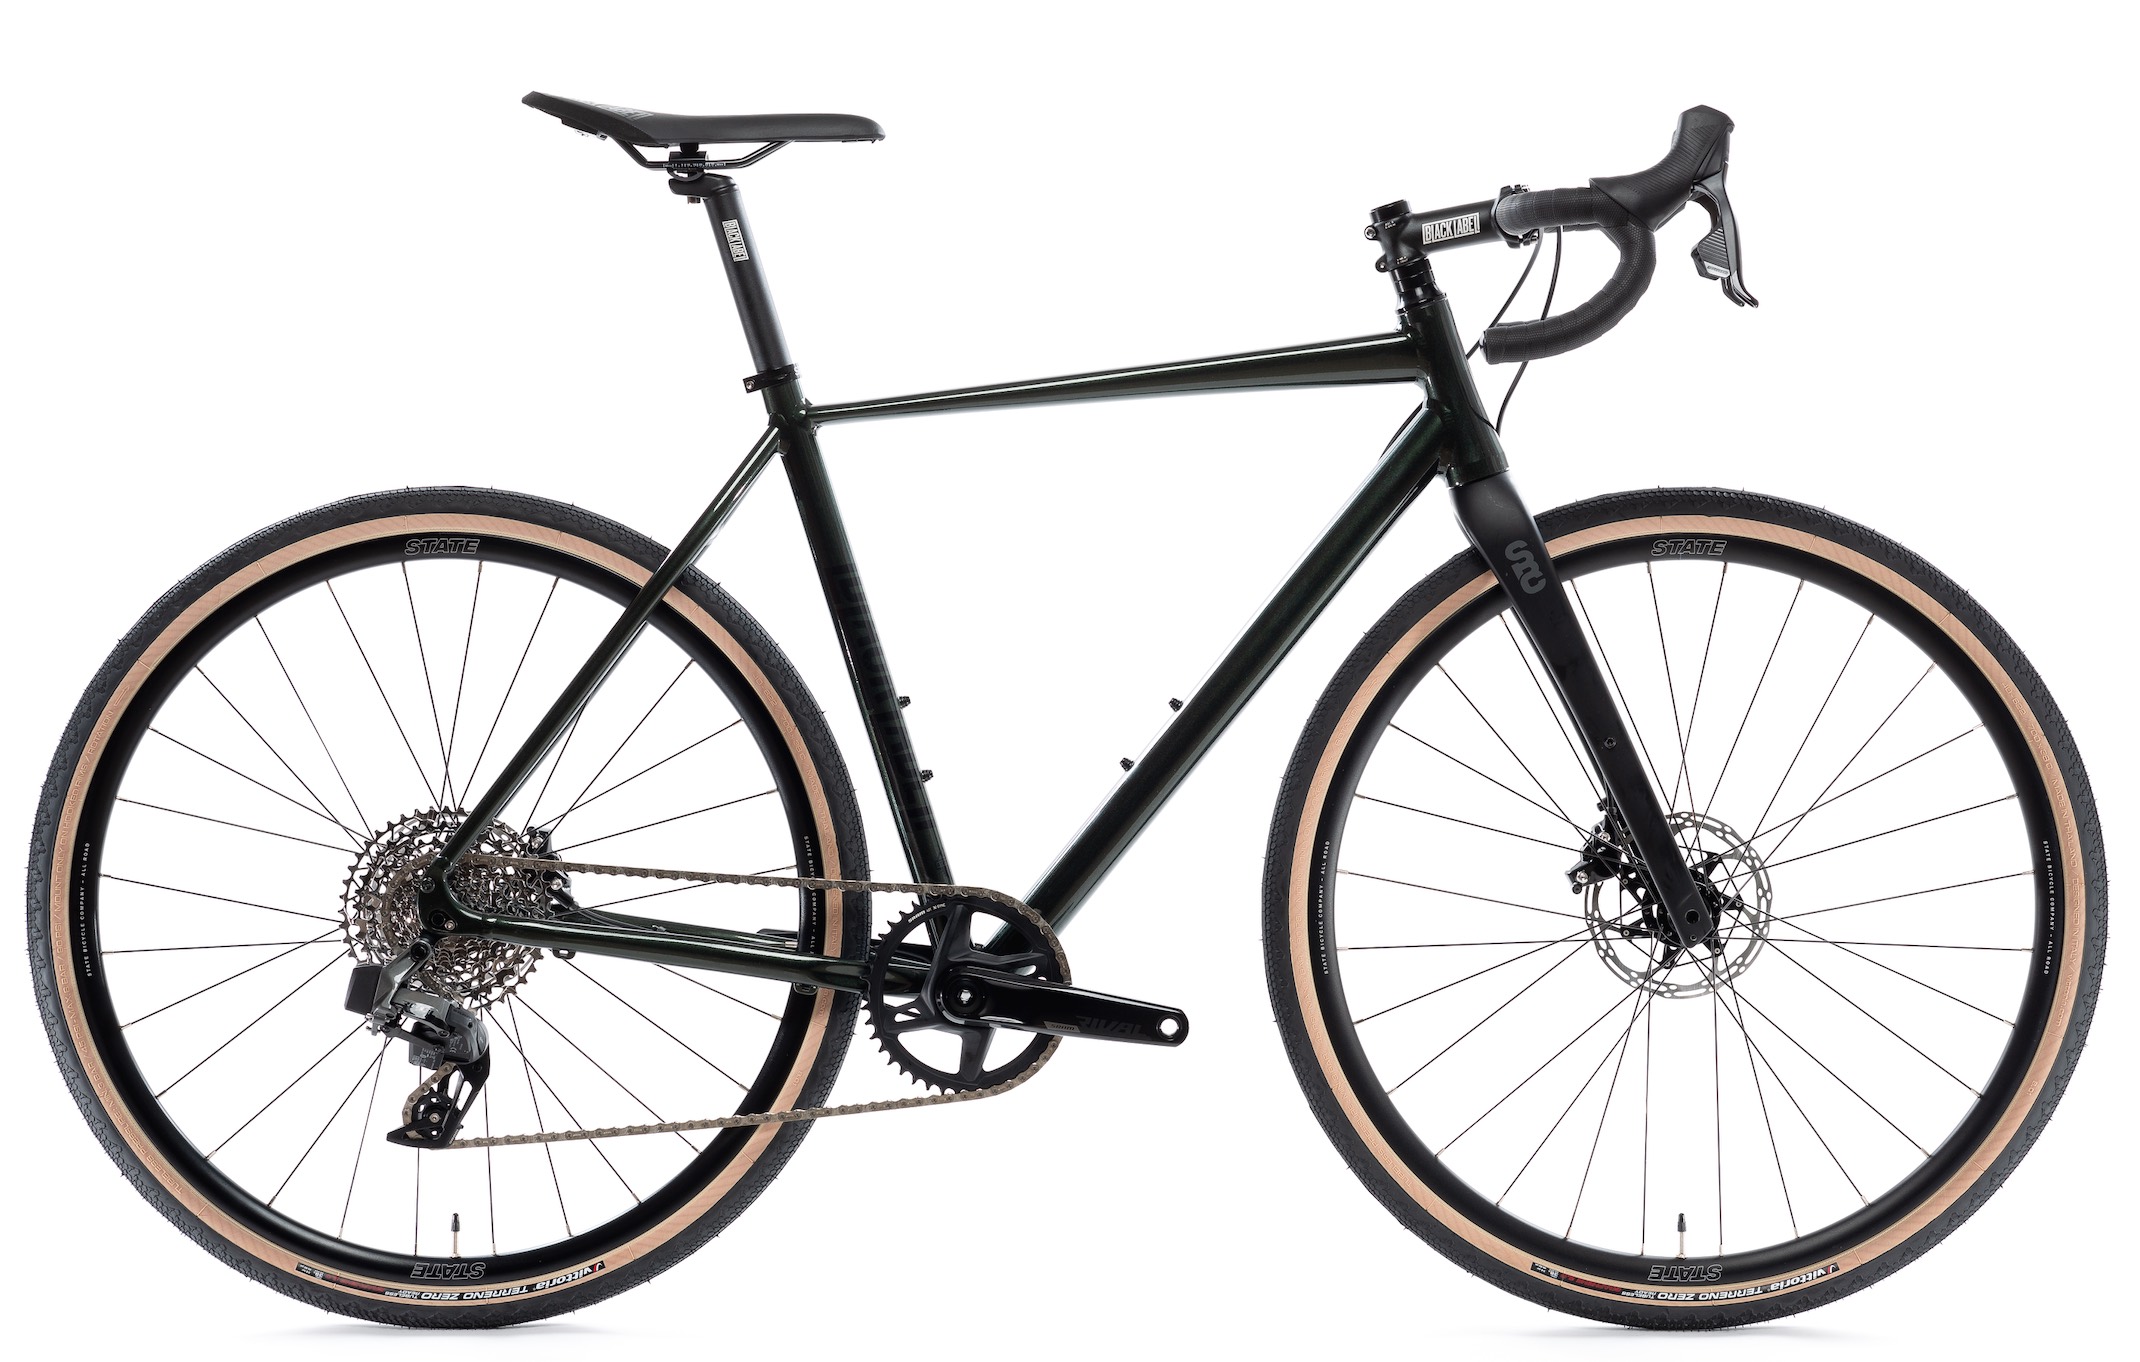 Curve Kevin of Steel III gravel bike in review